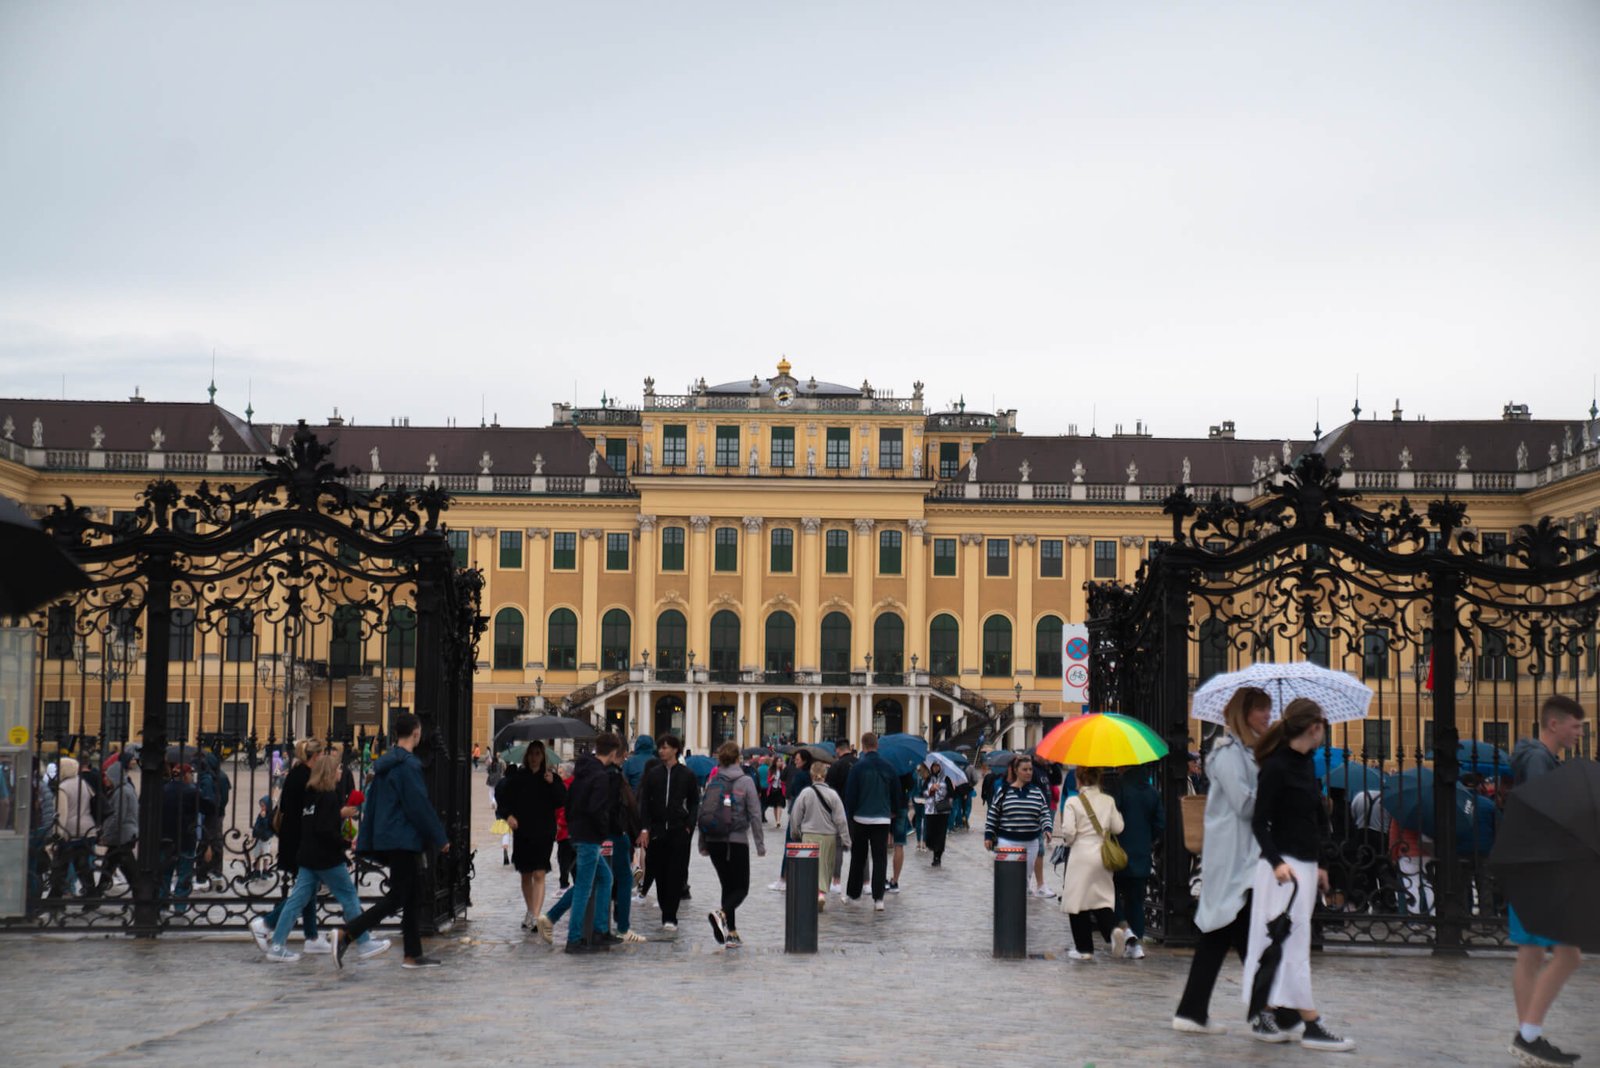 Shonbrunn Palace, things to do in Vienna